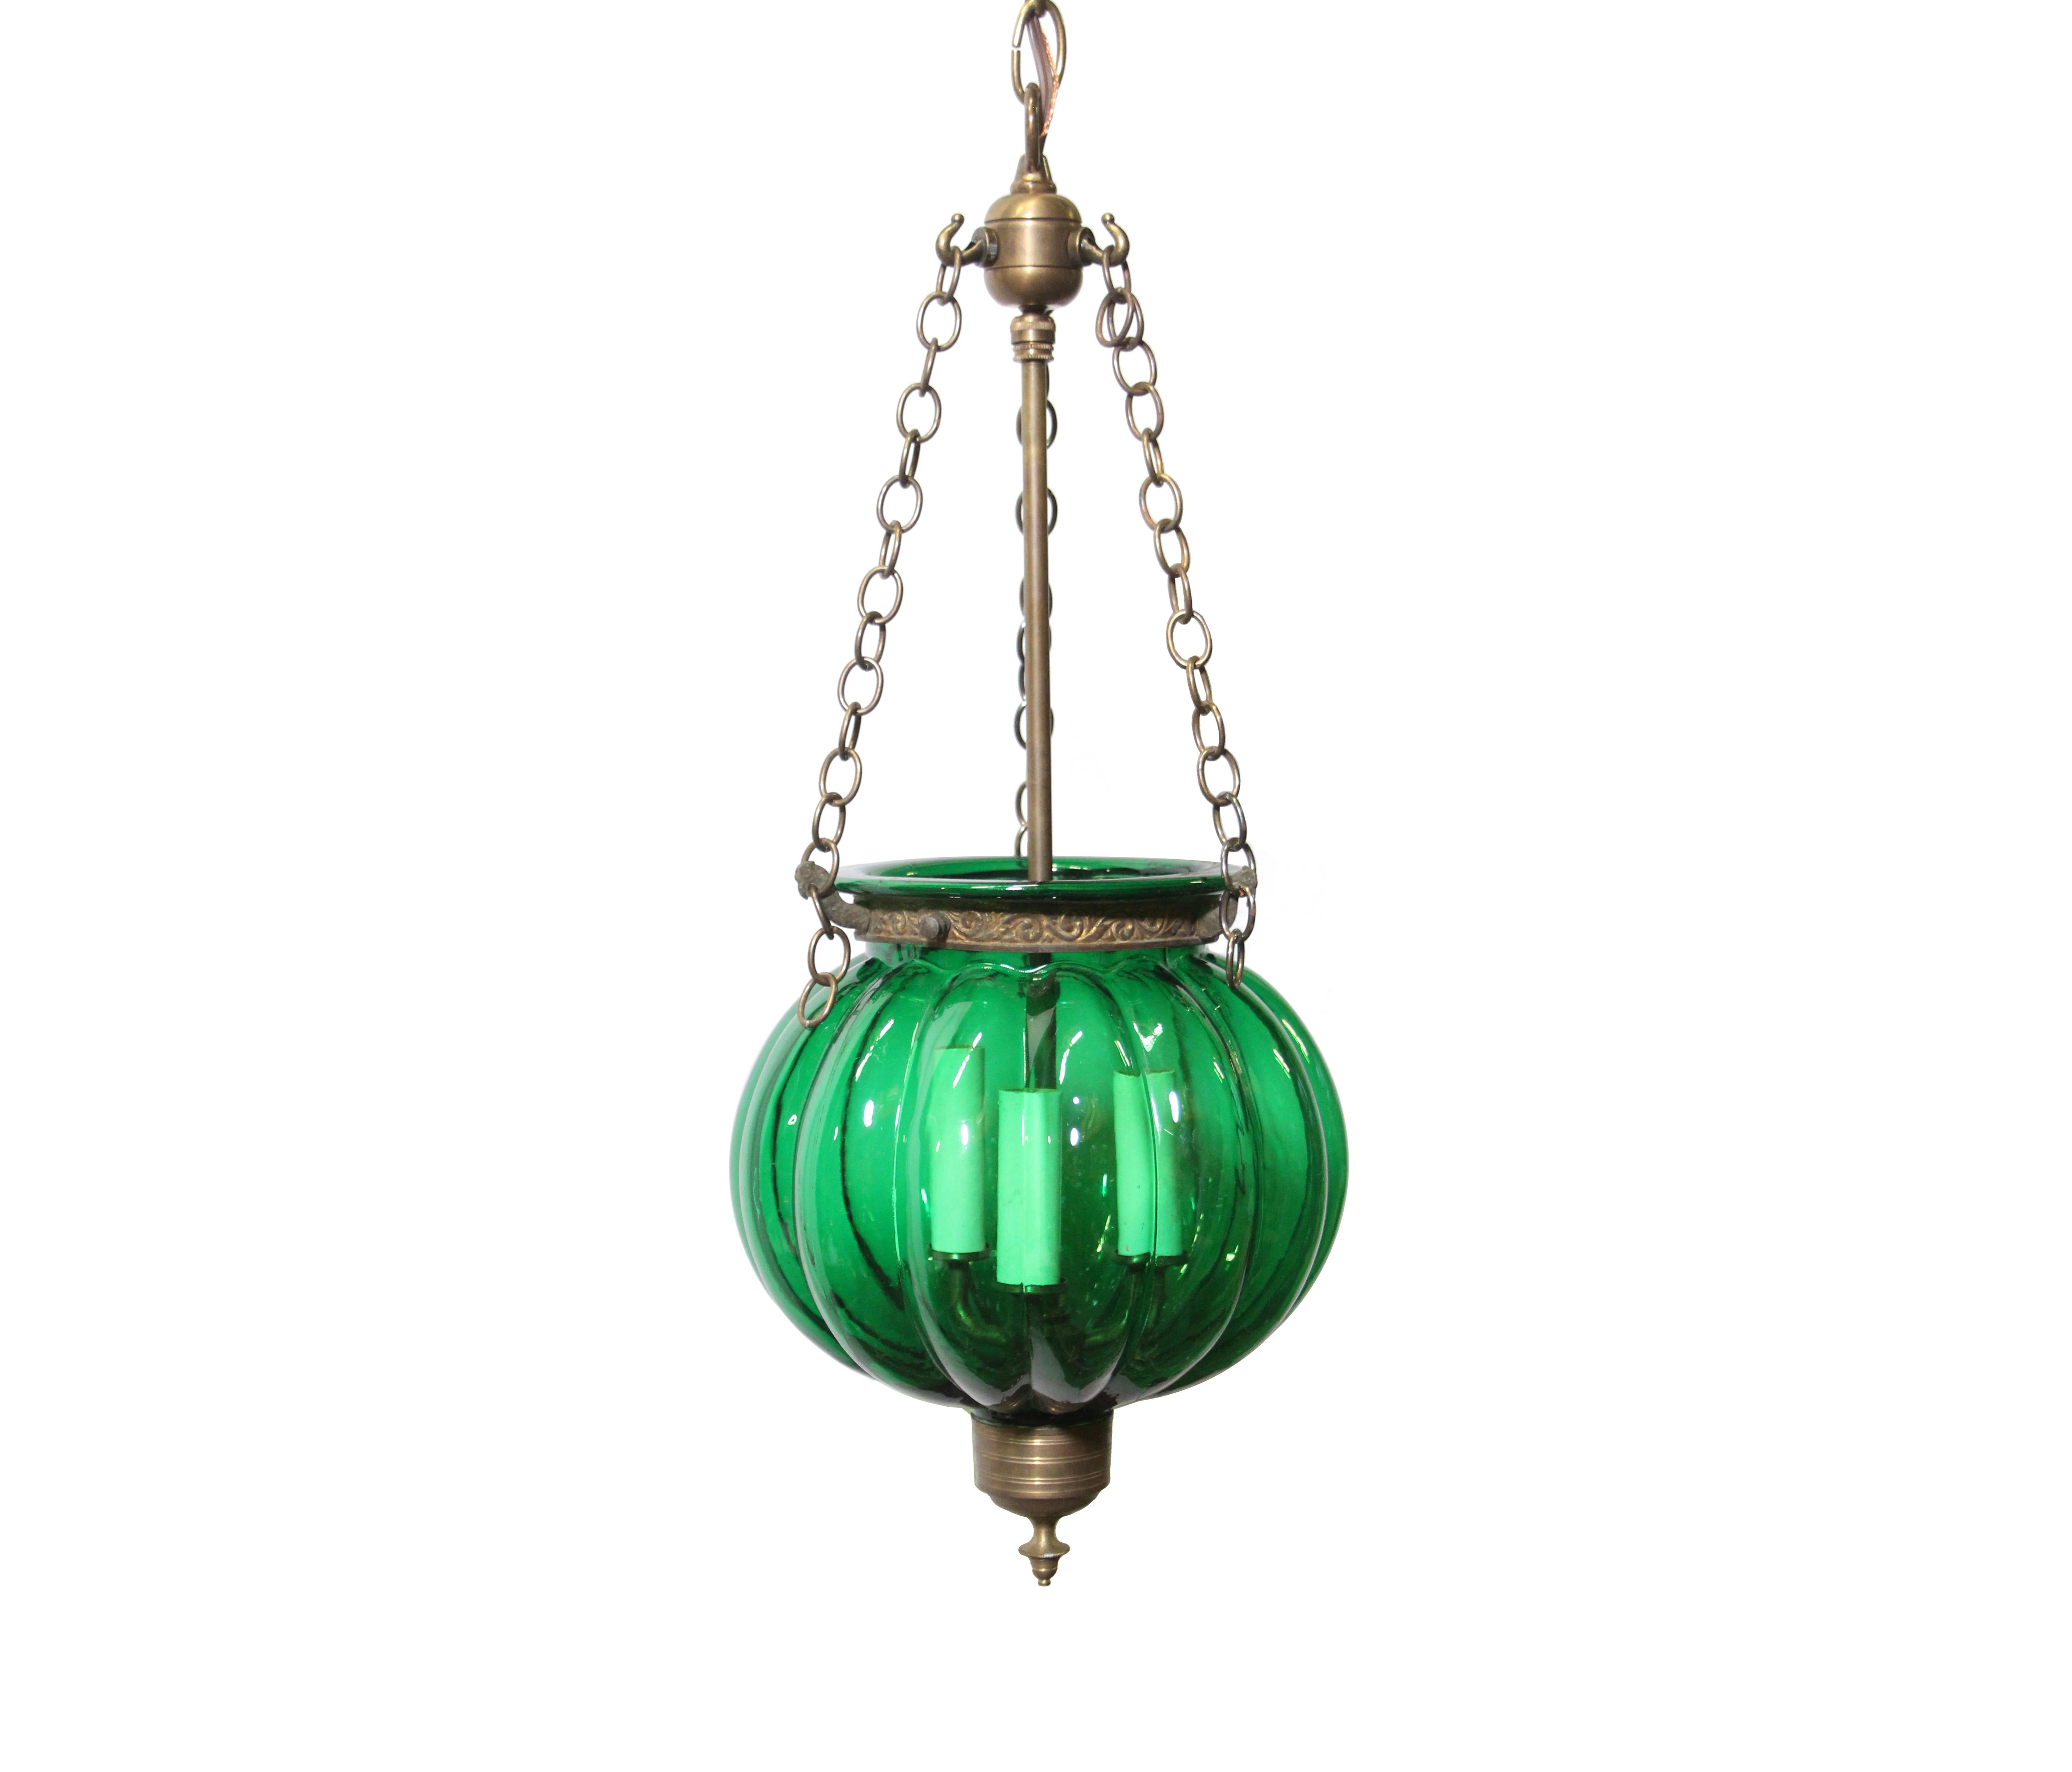 Custom order for Theresa. This five piece set consists of three early 20th century antique original hand blown green glass bell jar pendant lights of the 